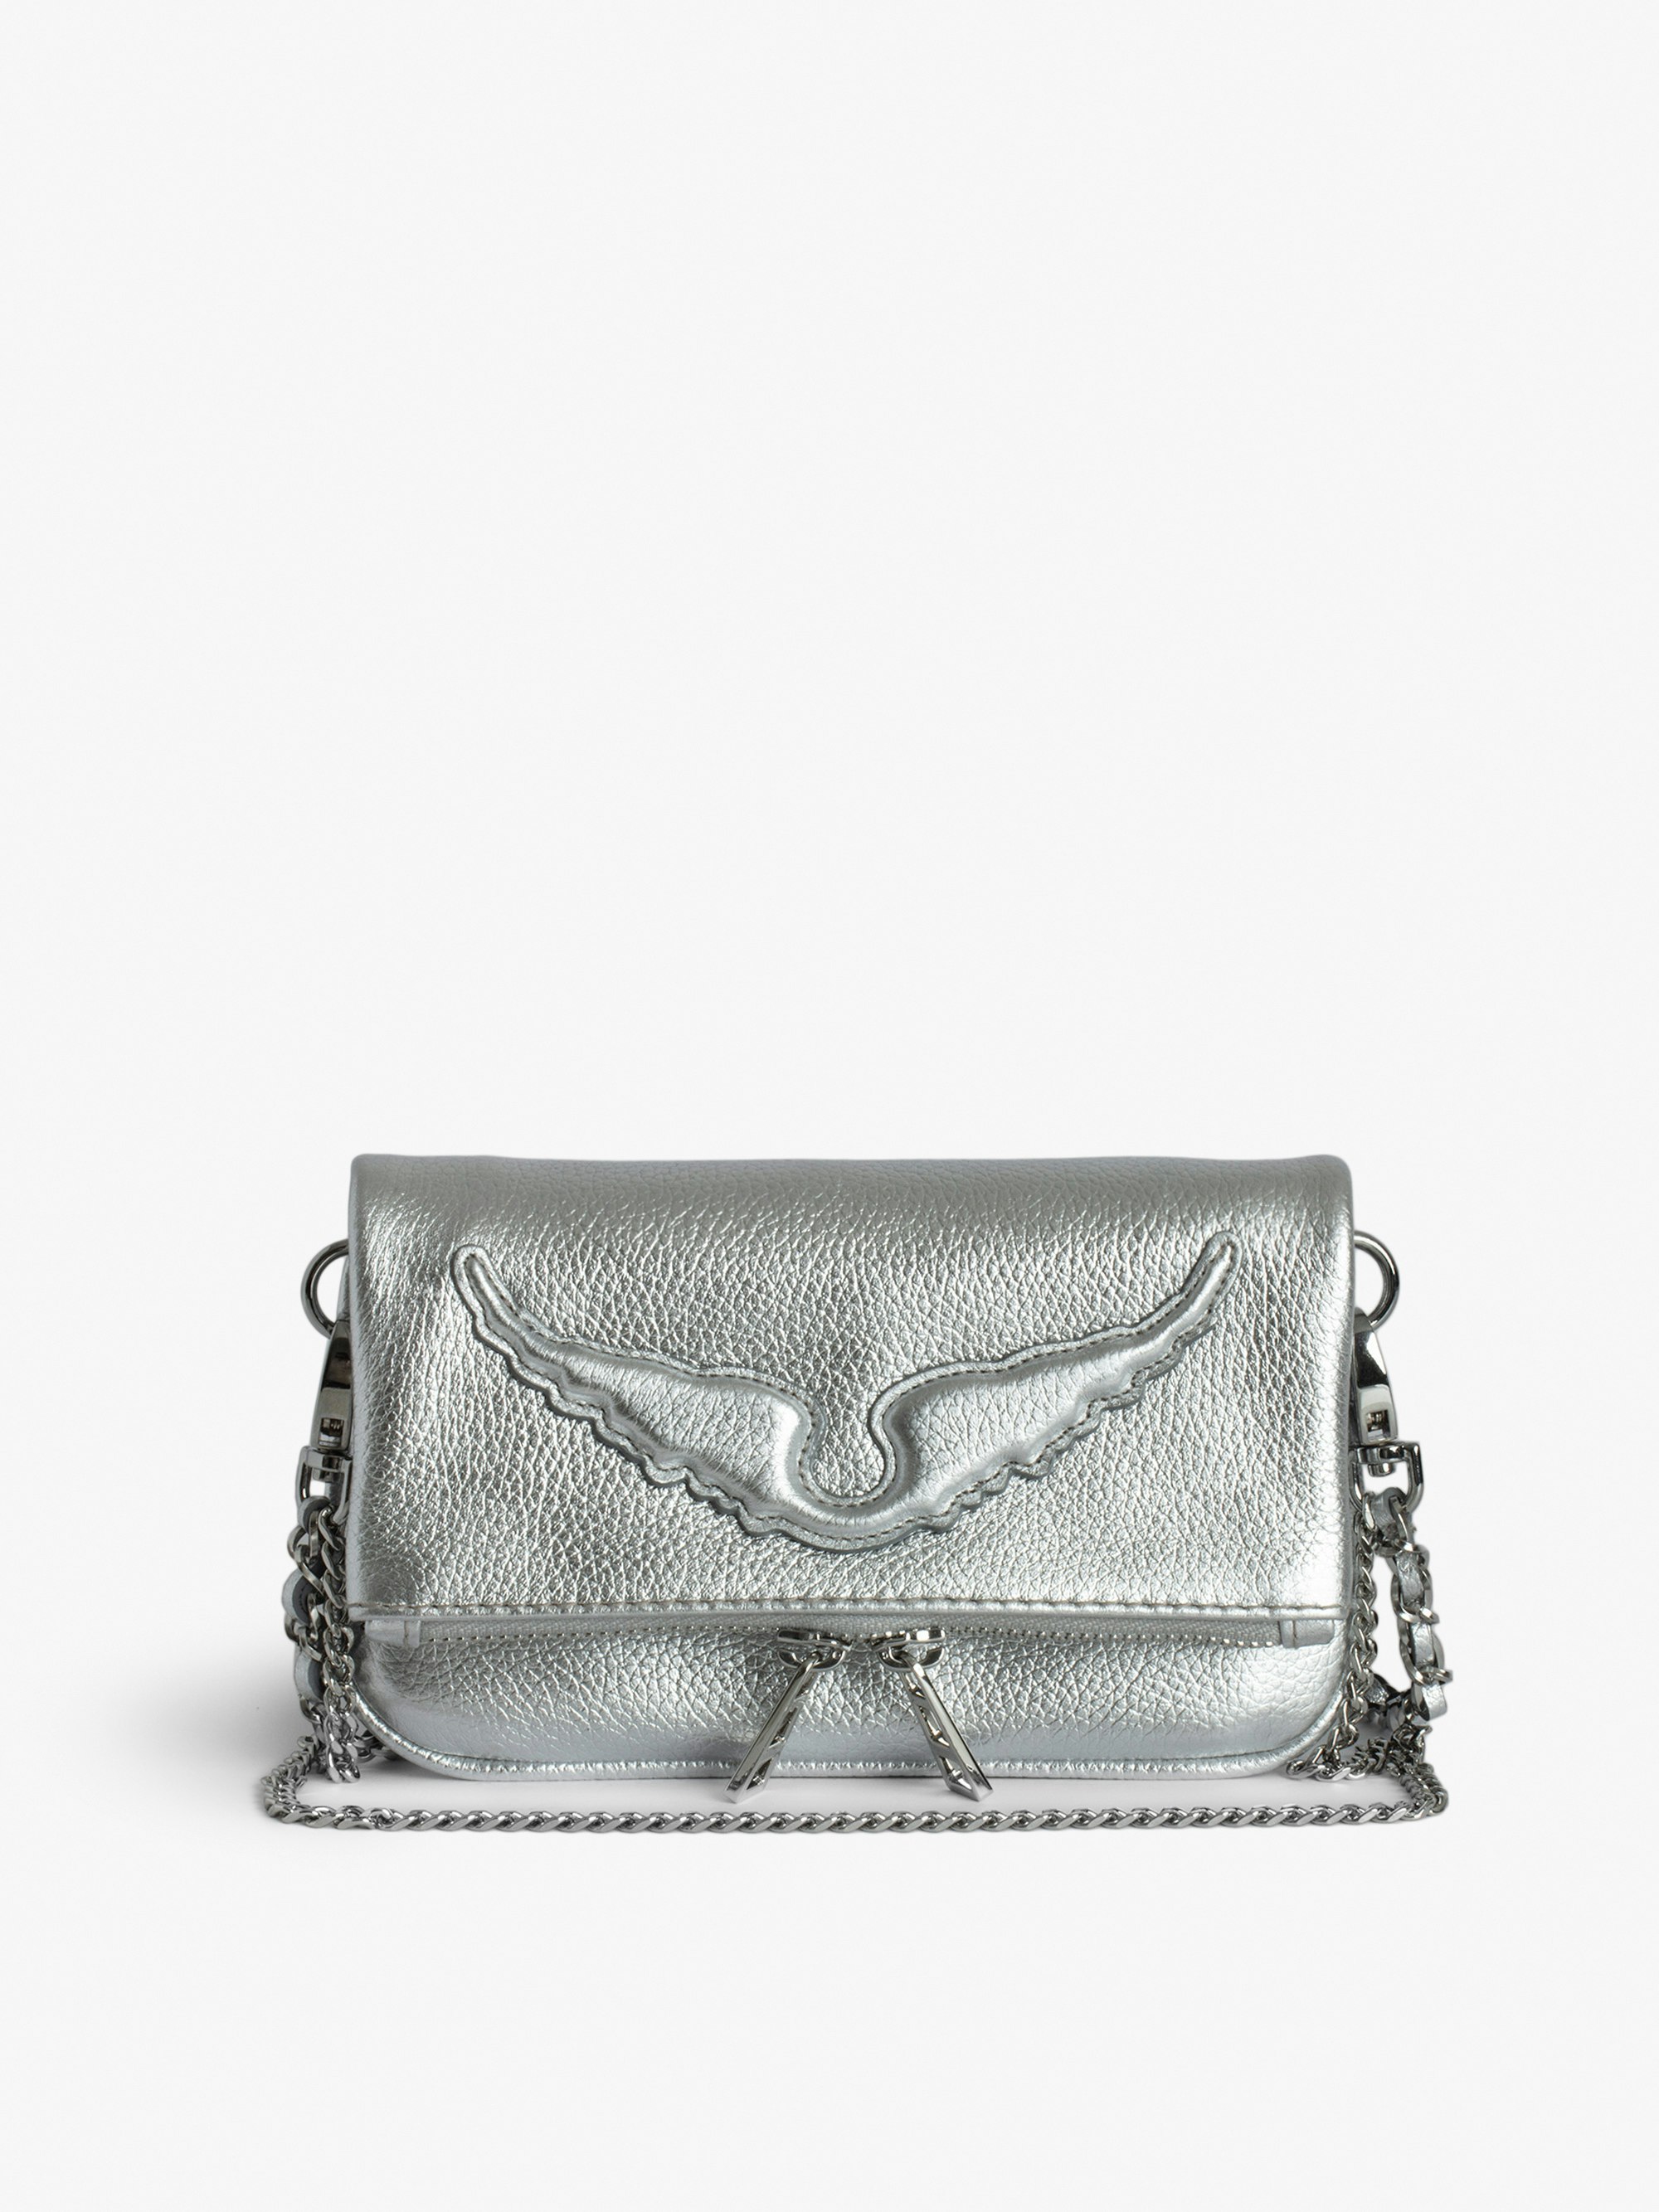 Rock Nano Clutch - Small silver-tone metallic grained leather clutch with double chain and signature embossed wings.